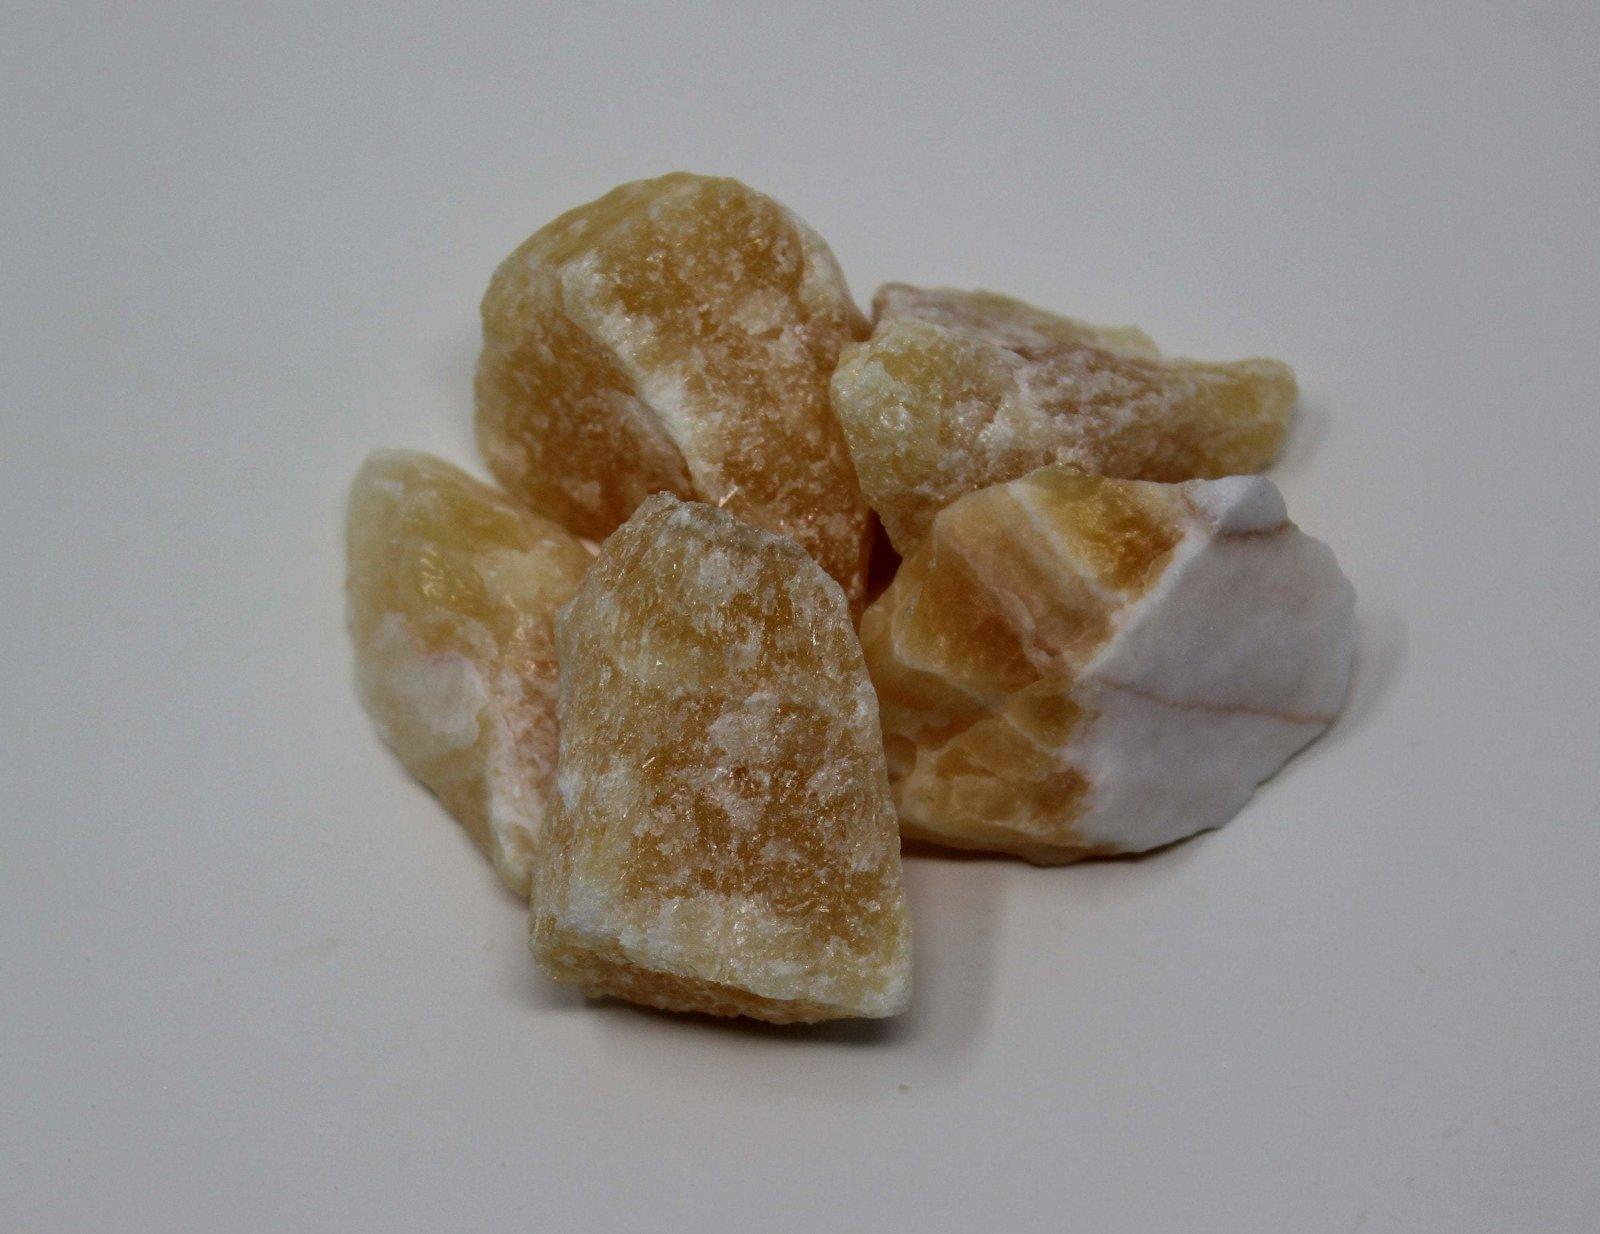 ONE Mexican Orange/Yellow Calcite Crystal! Calcium Carbonate Crystal! - LapidaryCentral